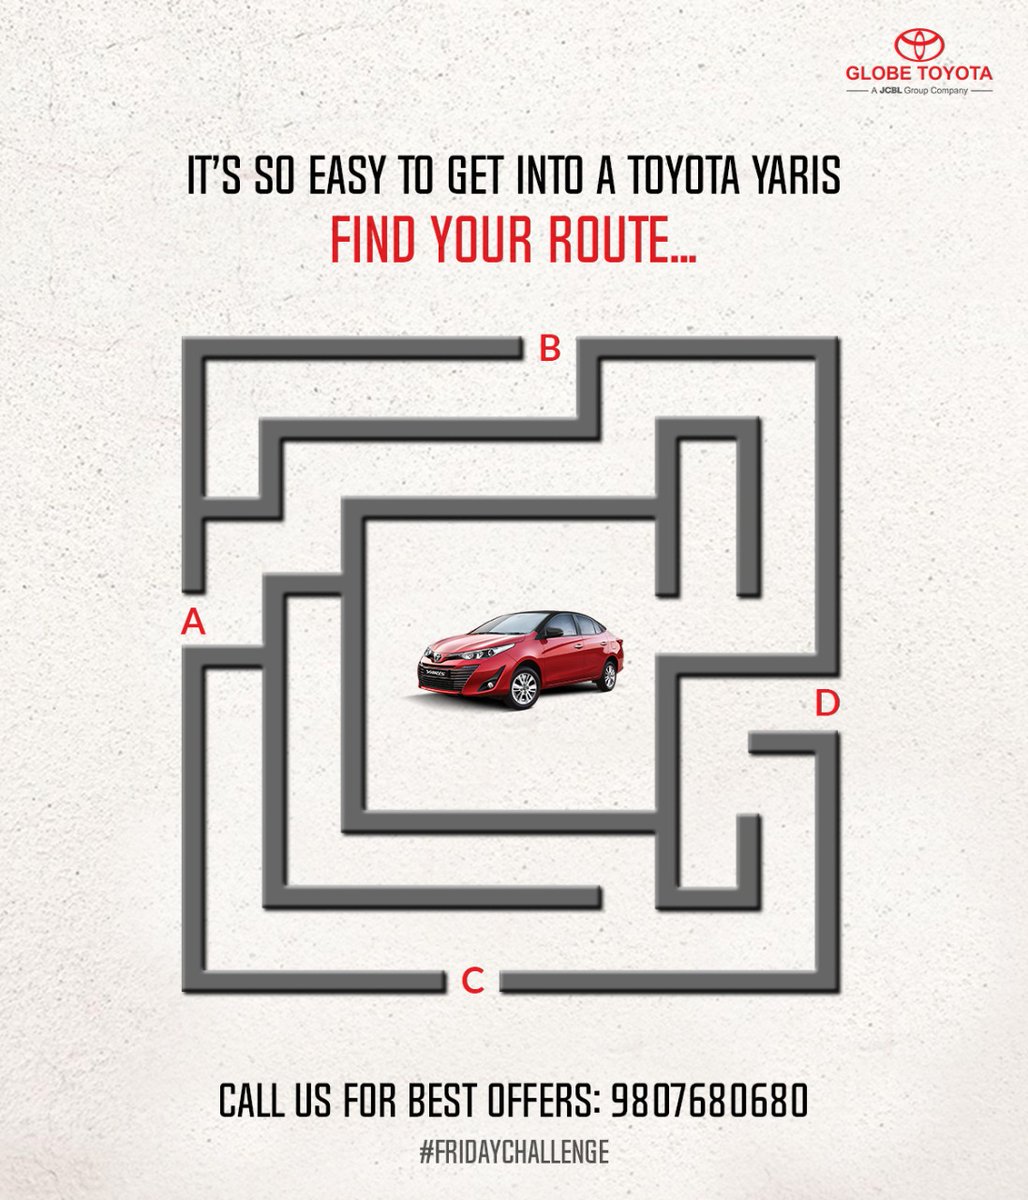 Ready for the challenge? 😄 Guess the right route now 🤔

Comment fast 👇

#GlobeToyota #FridayFun #FridayChallenge #Toyota #ToyotaDealer #FindTheRoute #ToyotaPinstripePride #CarSafety #LoveForCars #ToyotaPunjab #ToyotaHaryana #ChandigarhUpdate #challenge #ChallengeAccepted